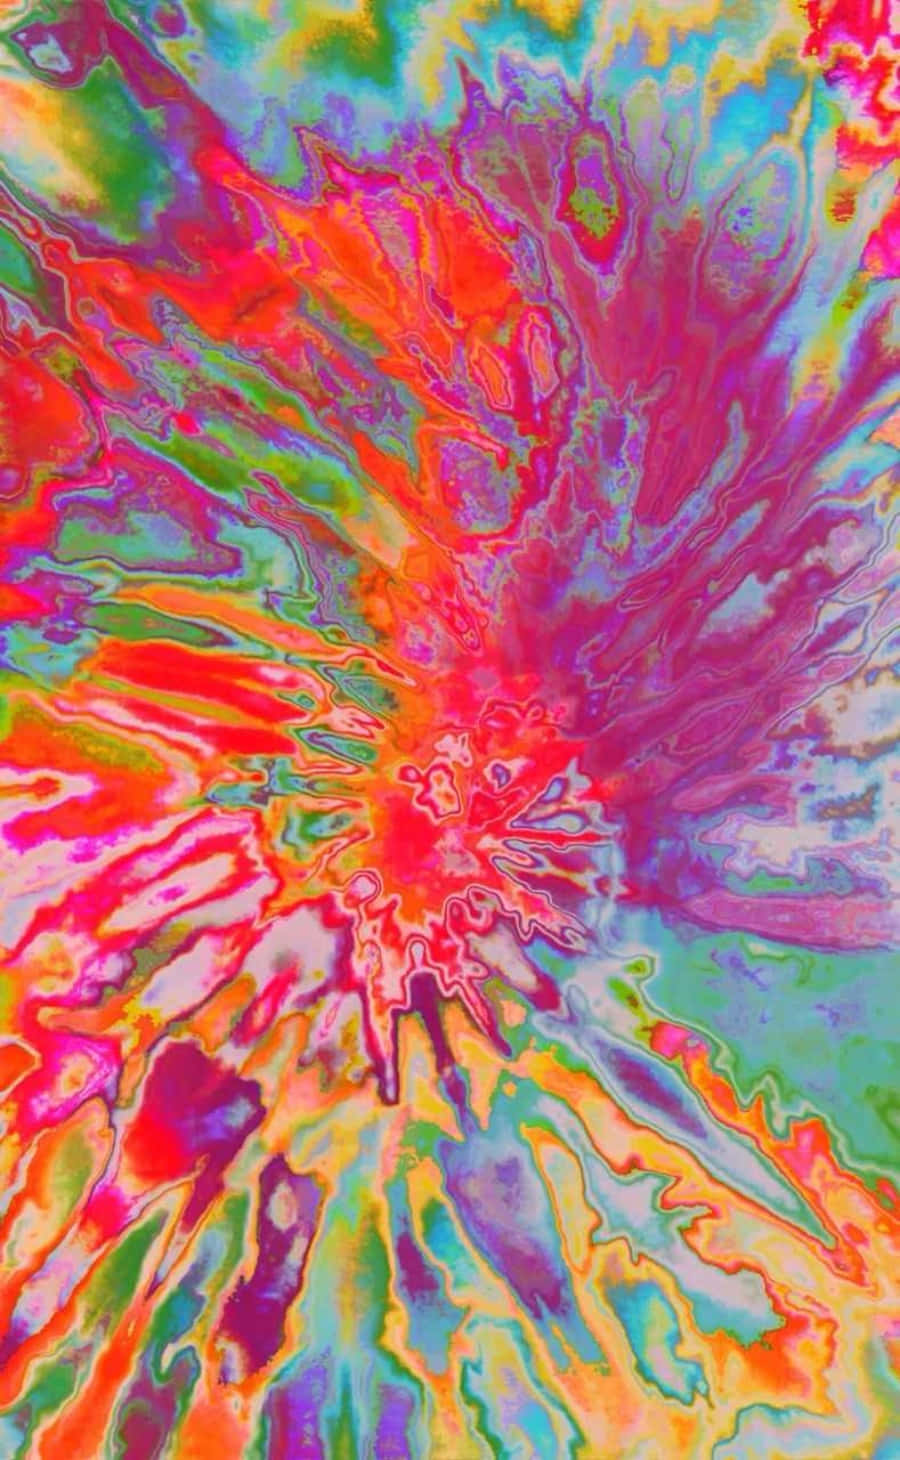 Get Inspired By This Vibrant And Unique Pretty Tie Dye Wallpaper! Wallpaper